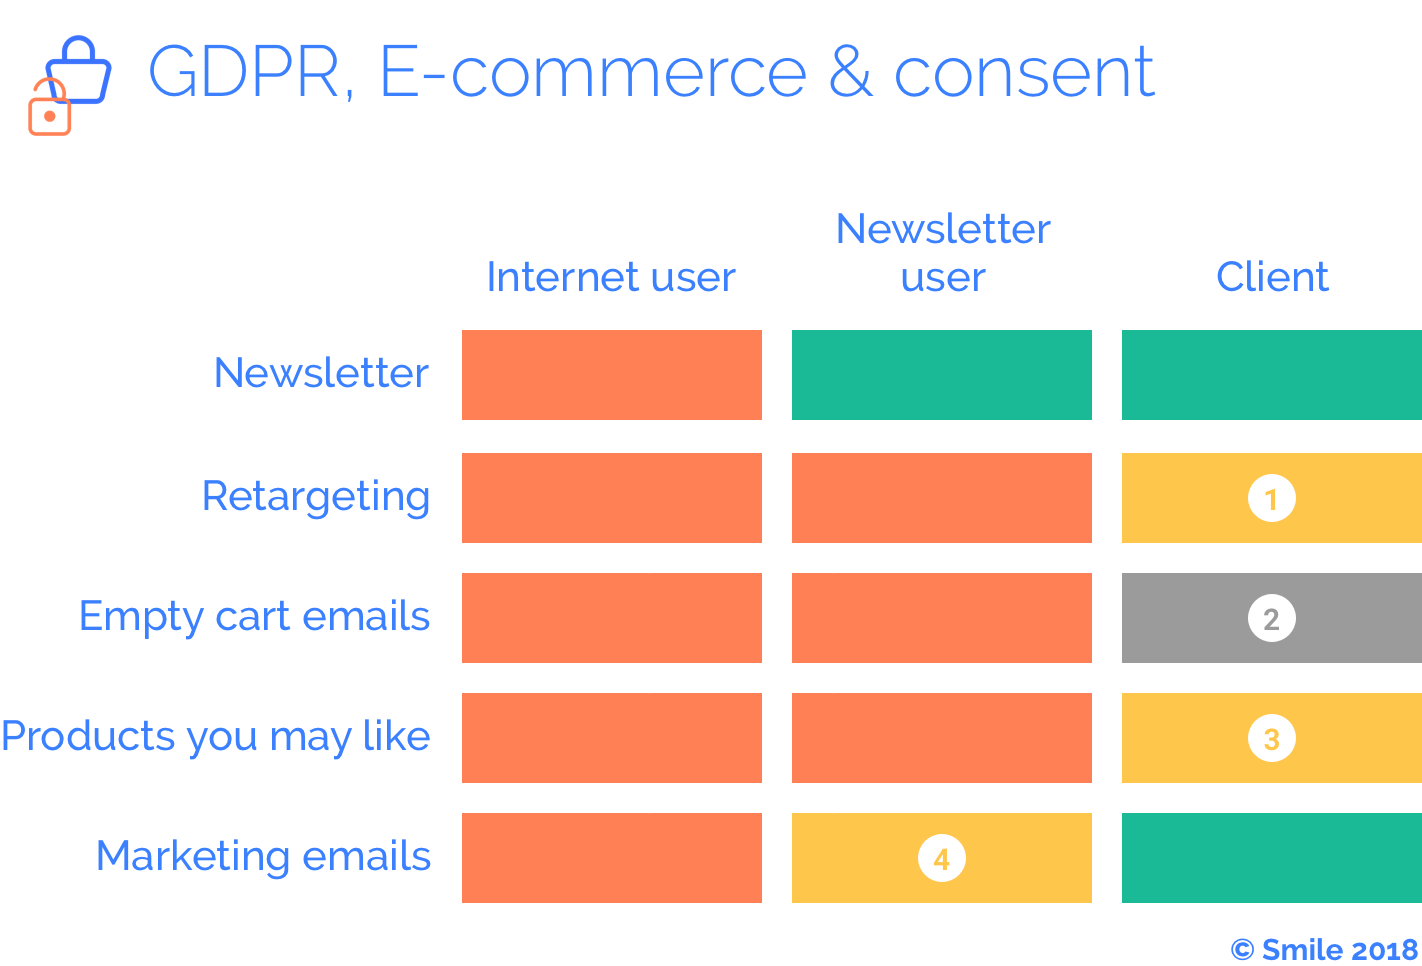 The do and don’t of e-commerce marketing following GDPR.